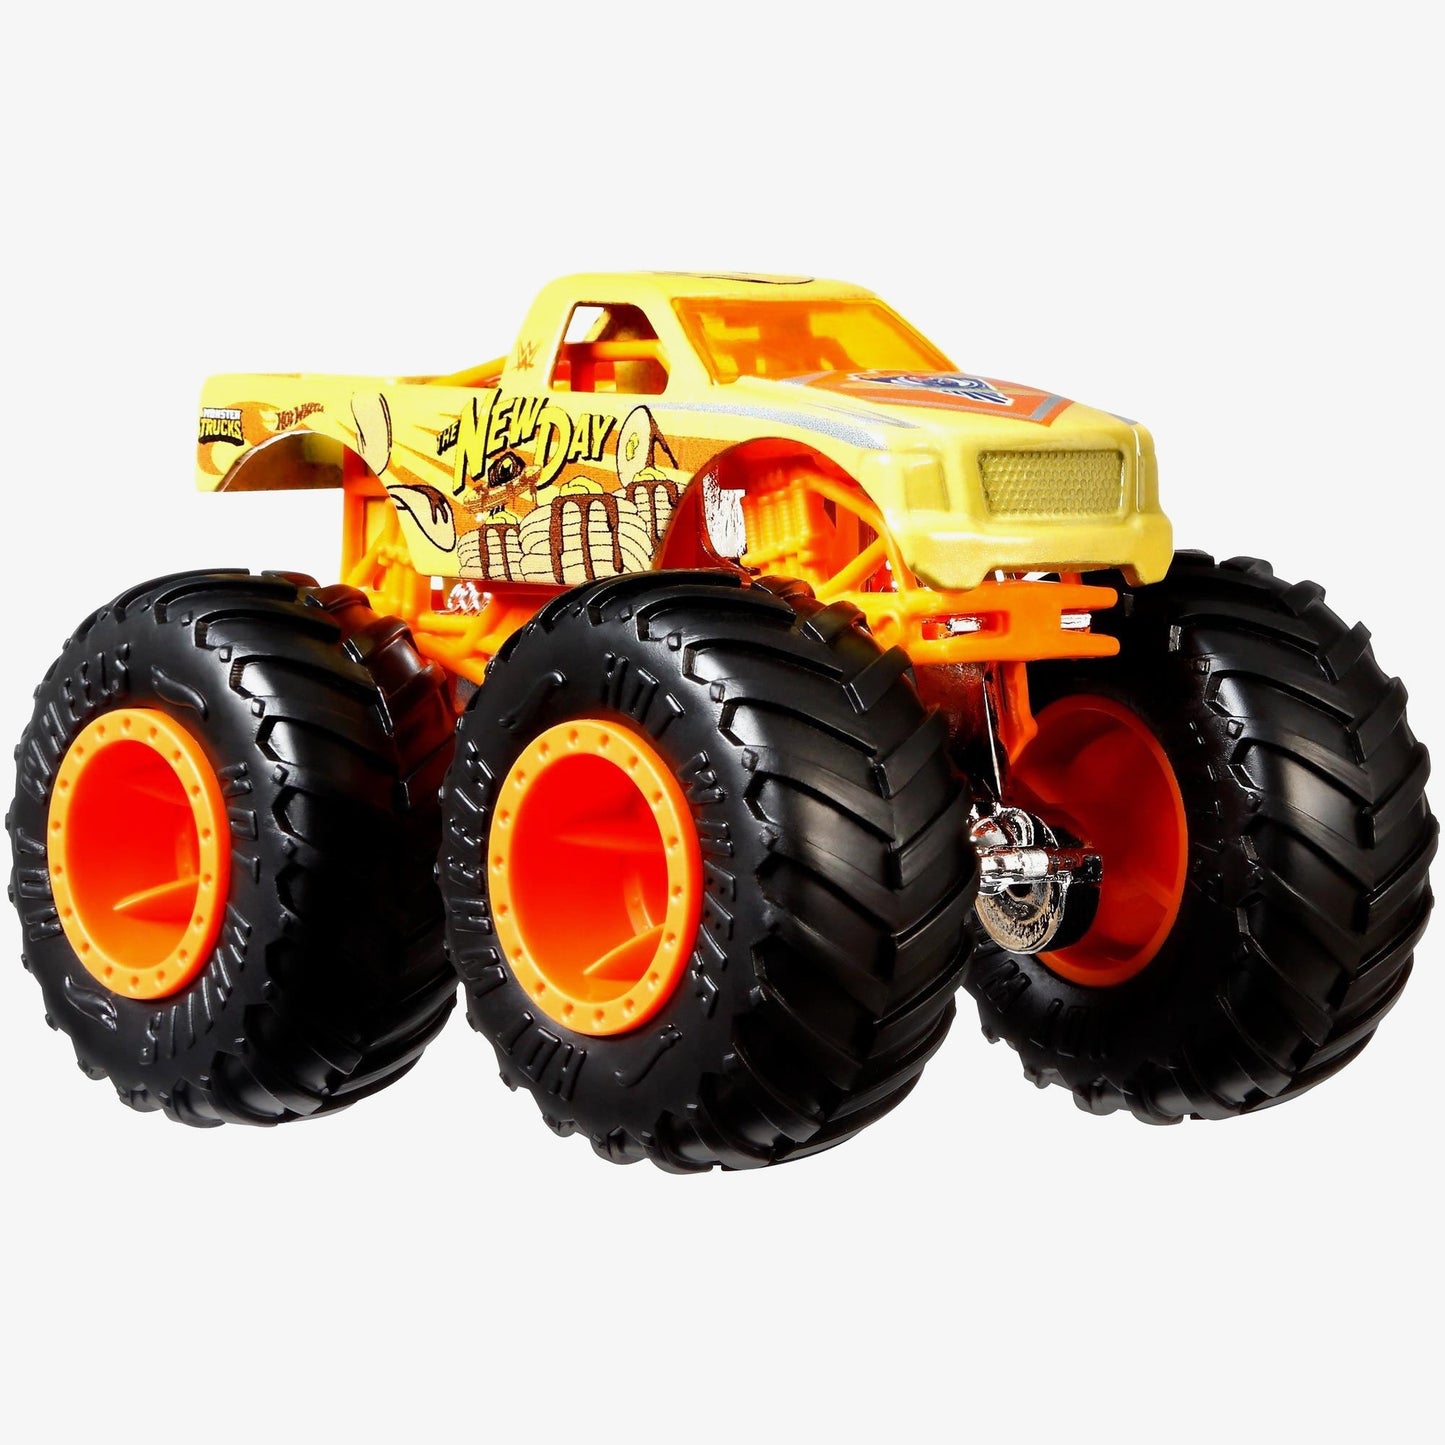 The New Day - Hot Wheels Monster Trucks WWE Die-Cast Collection